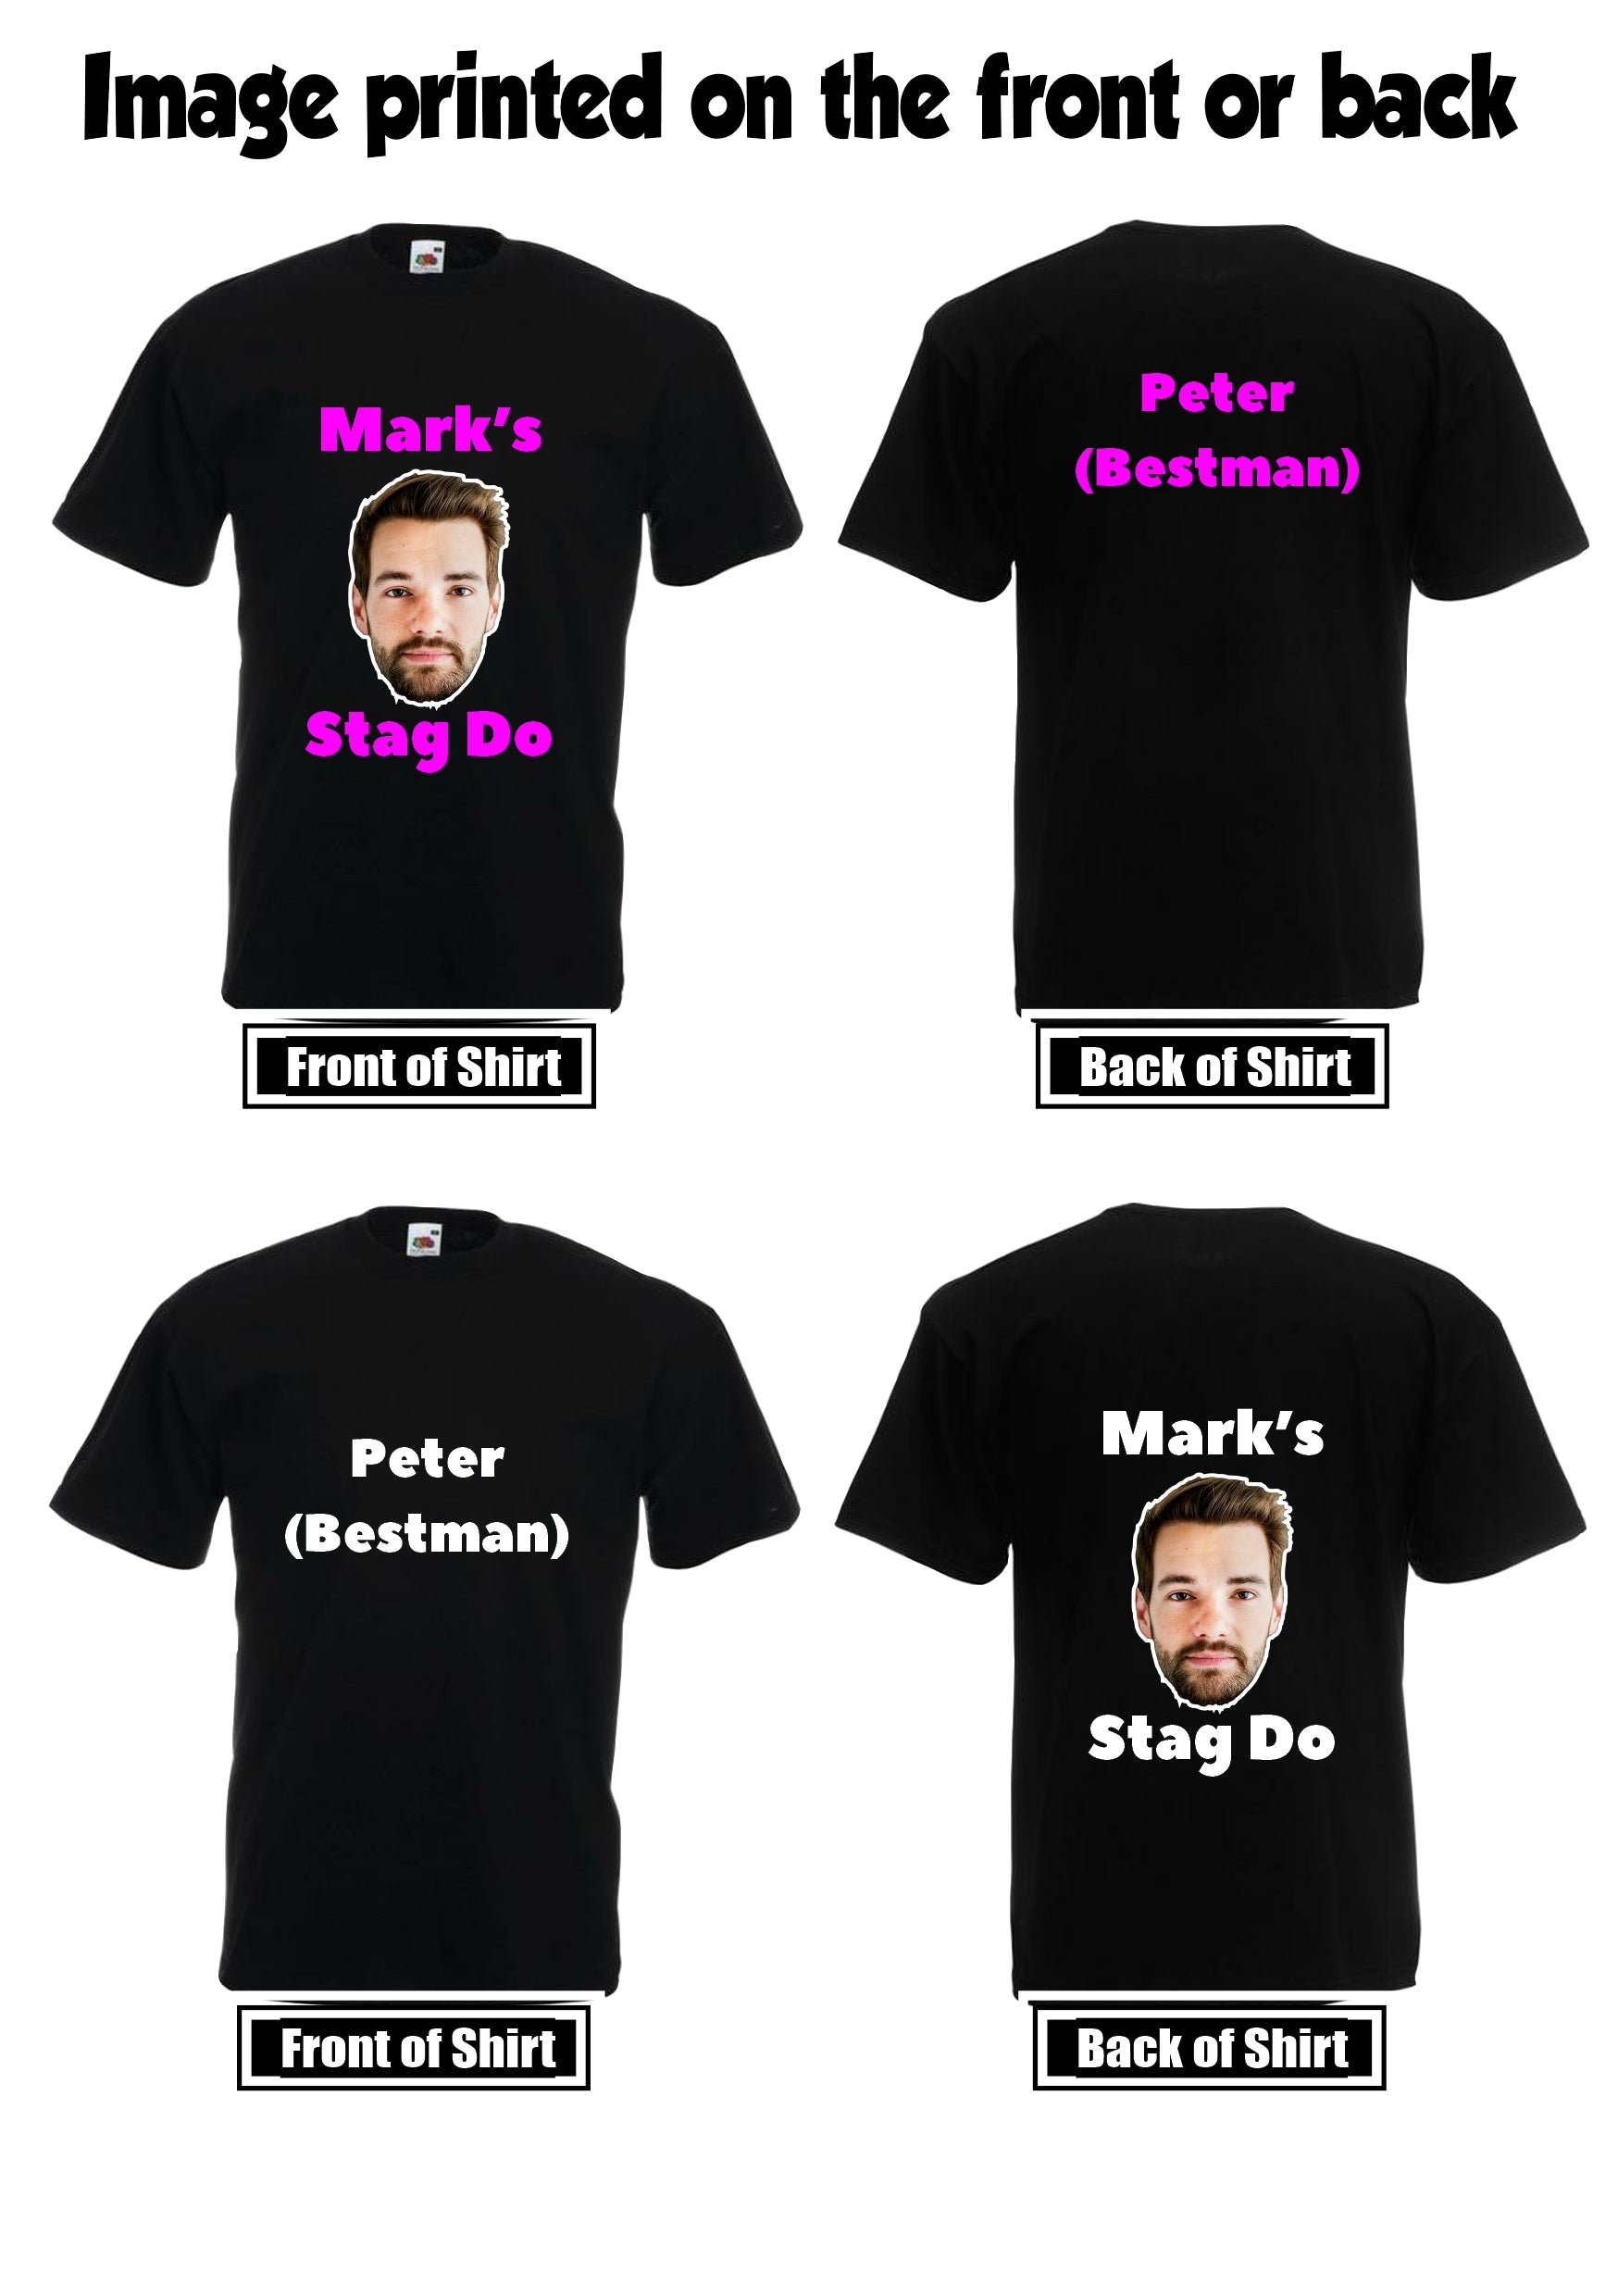 "Get ready to party with our custom Face Image made stag do t-shirts! Add a personal touch with your name&nbsp;and or number on the back. Choose from over 30 different colours upto 5XL*, this design is for Stag Do T Shirts with a printed Image of the Grooms Head. Perfect for celebrating in style!"